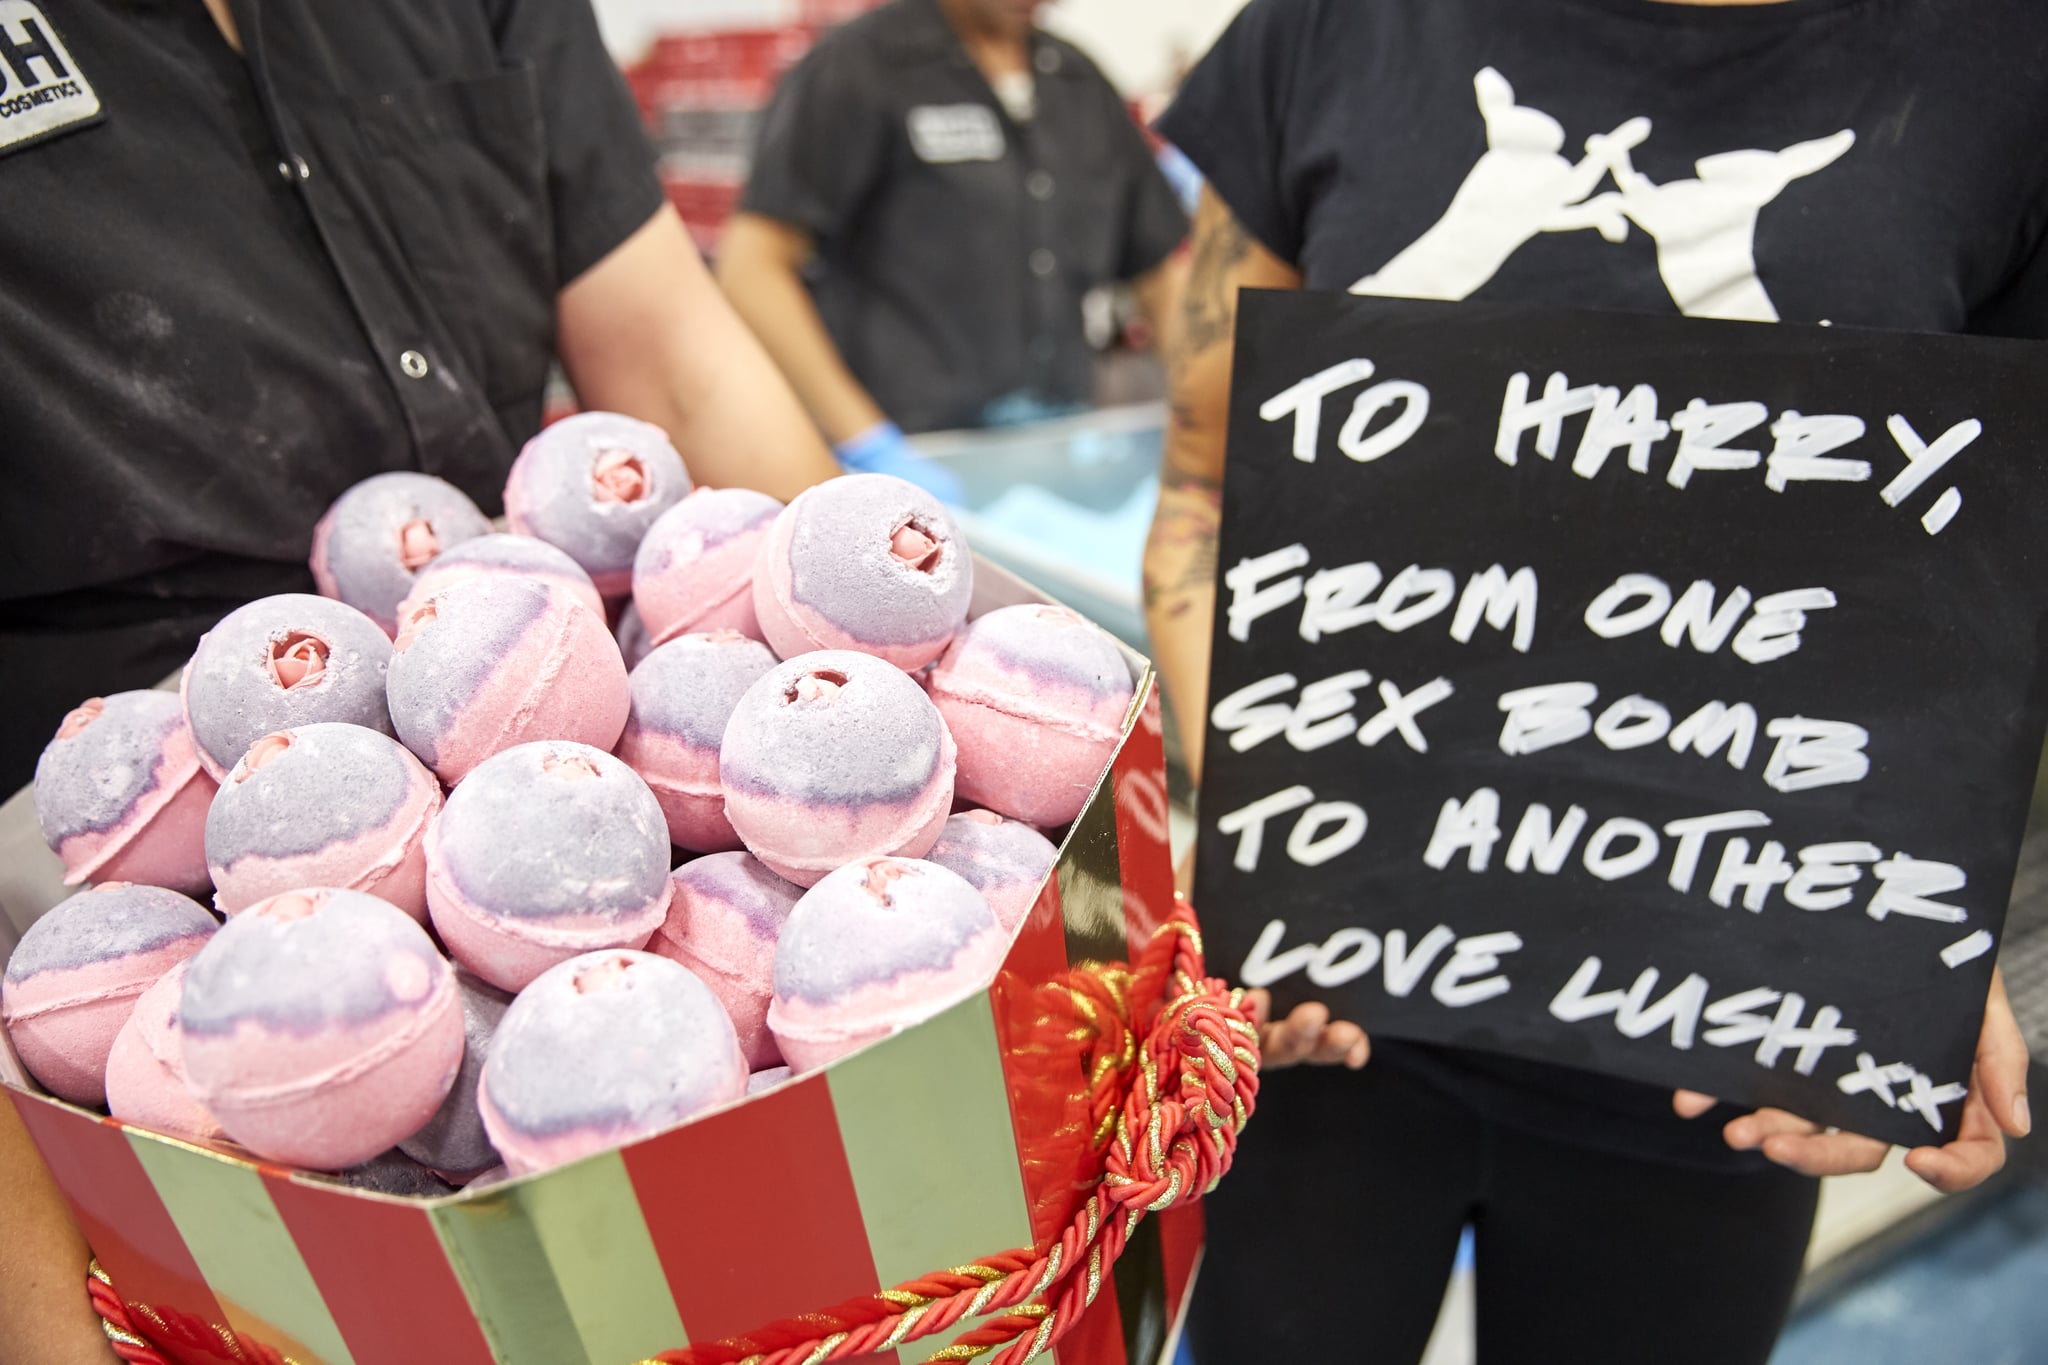 Lush Is Sending Harry Styles 100 Bath Bombs Because He's a Sex Bomb, O...